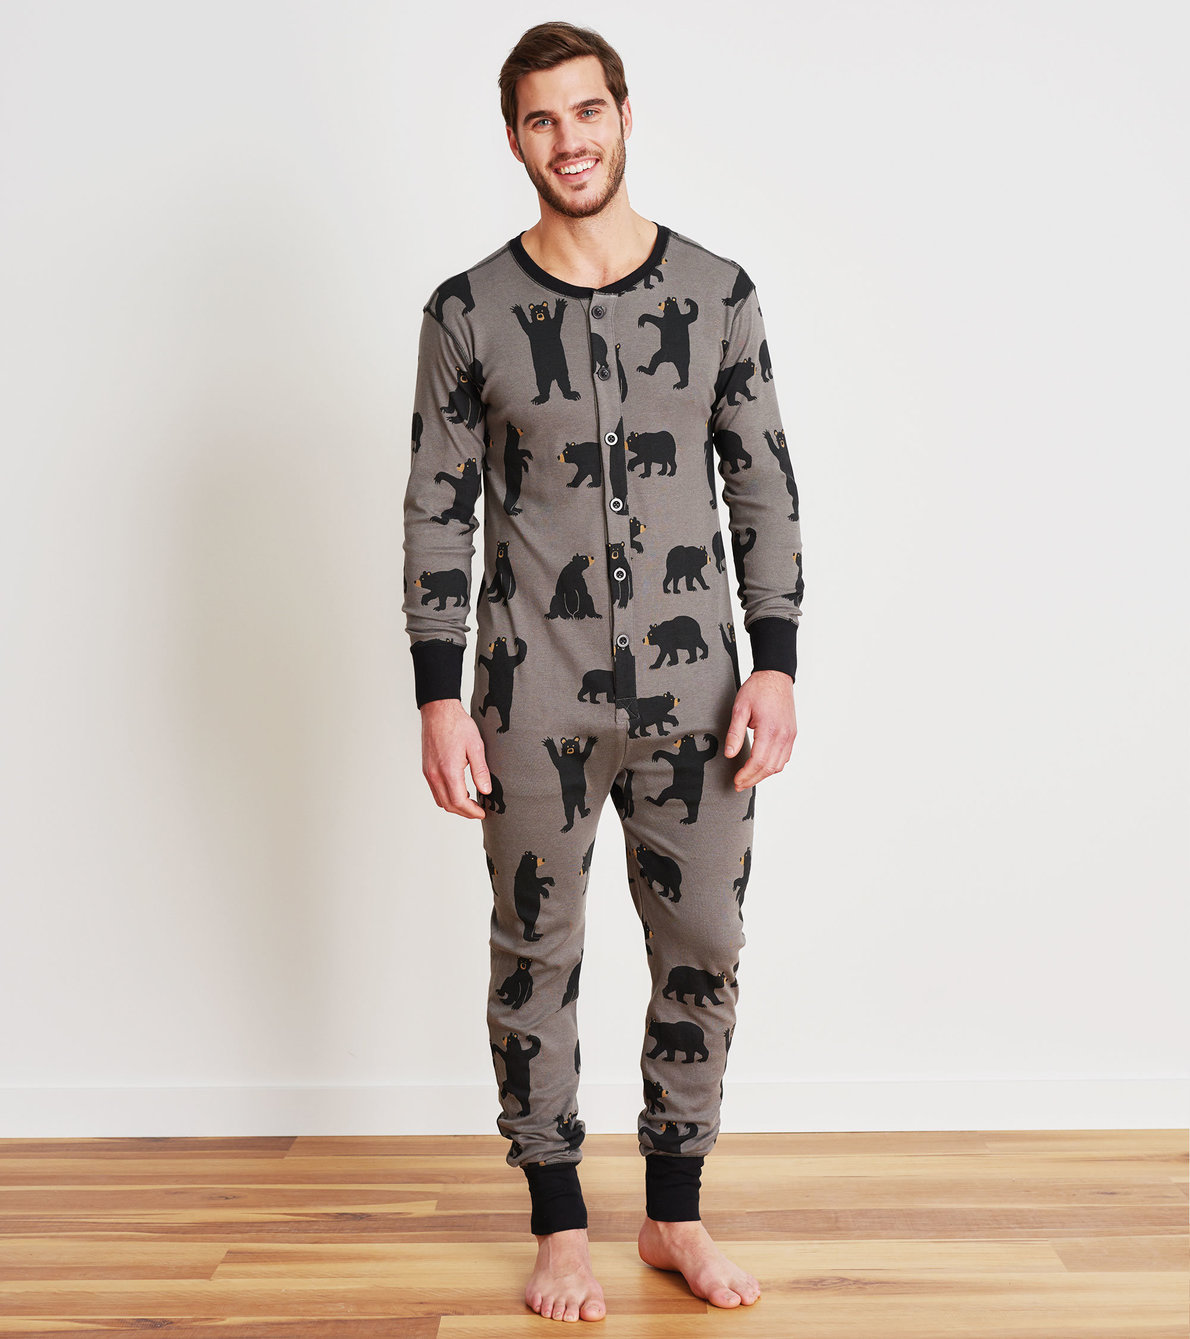 View larger image of Charcoal Bears Adult Union Suit